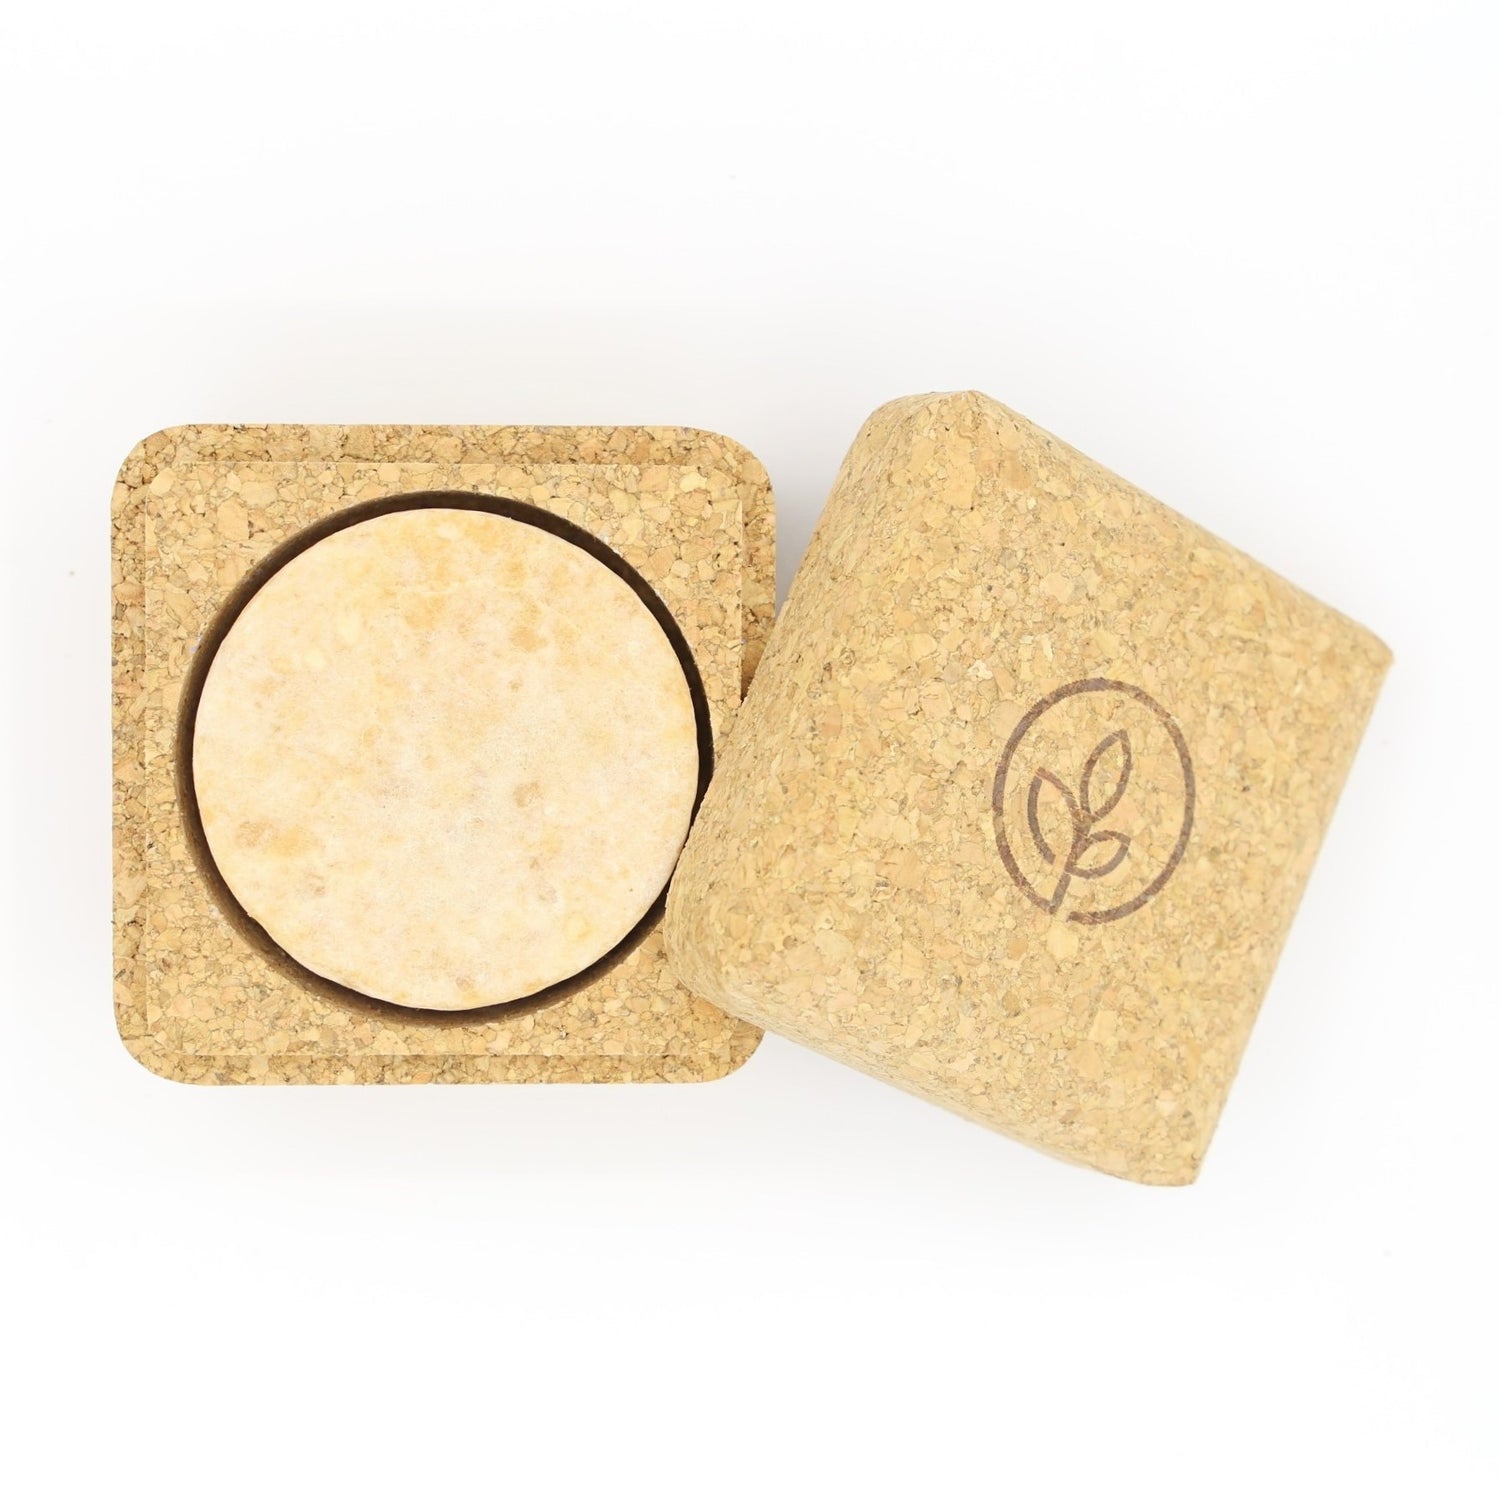 solid shampoo travel case made of cork from the top